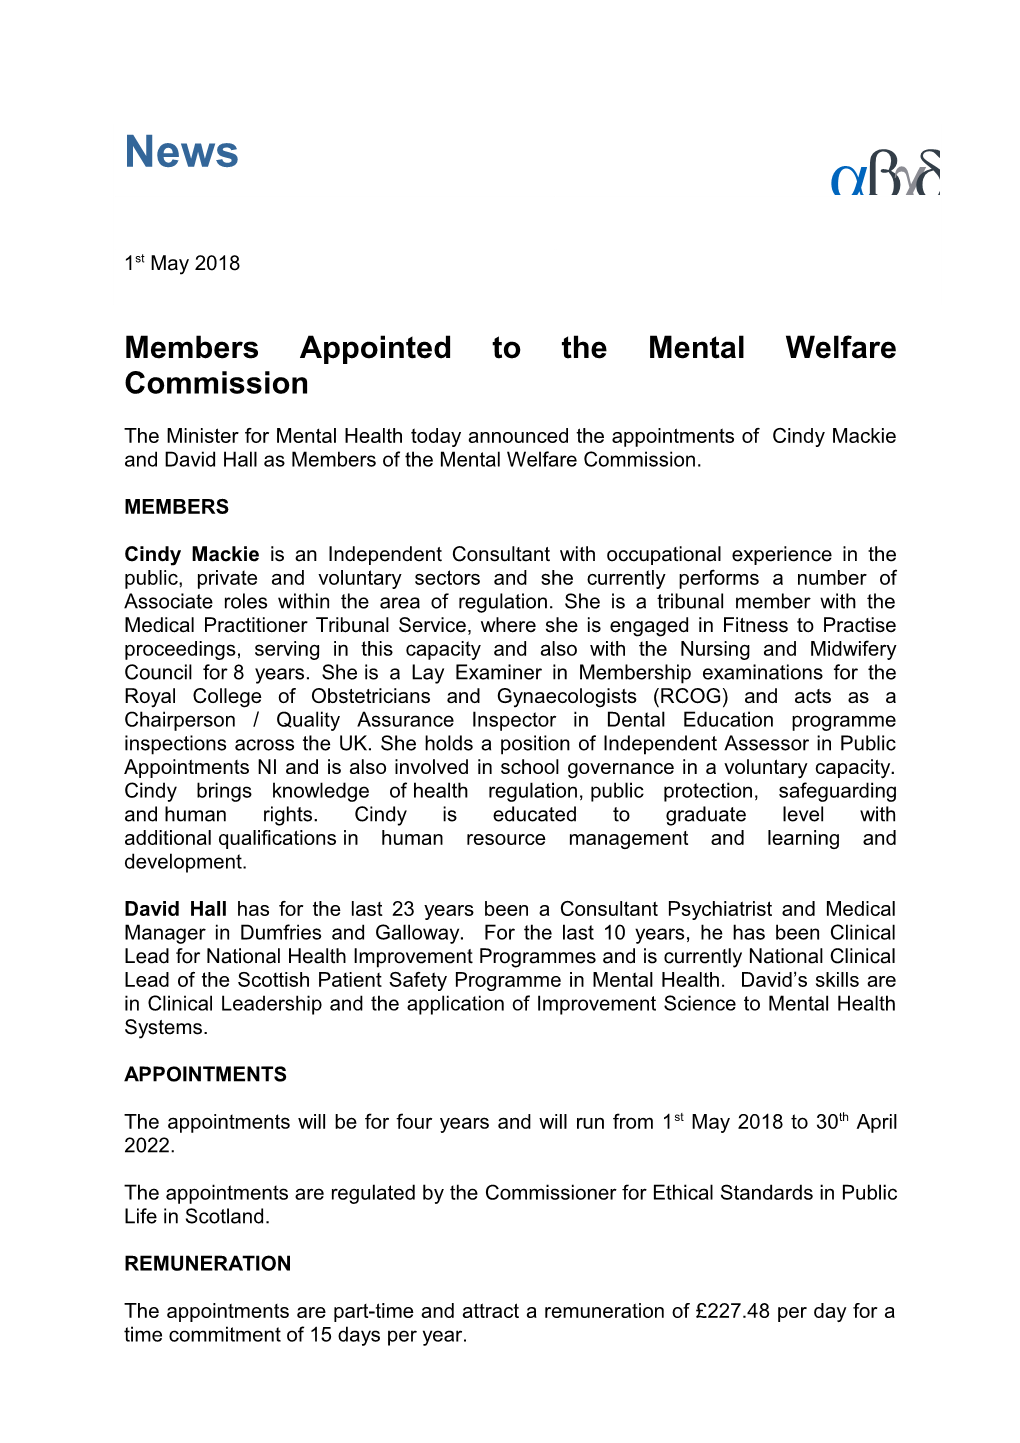 Membersappointed to the Mental Welfare Commission